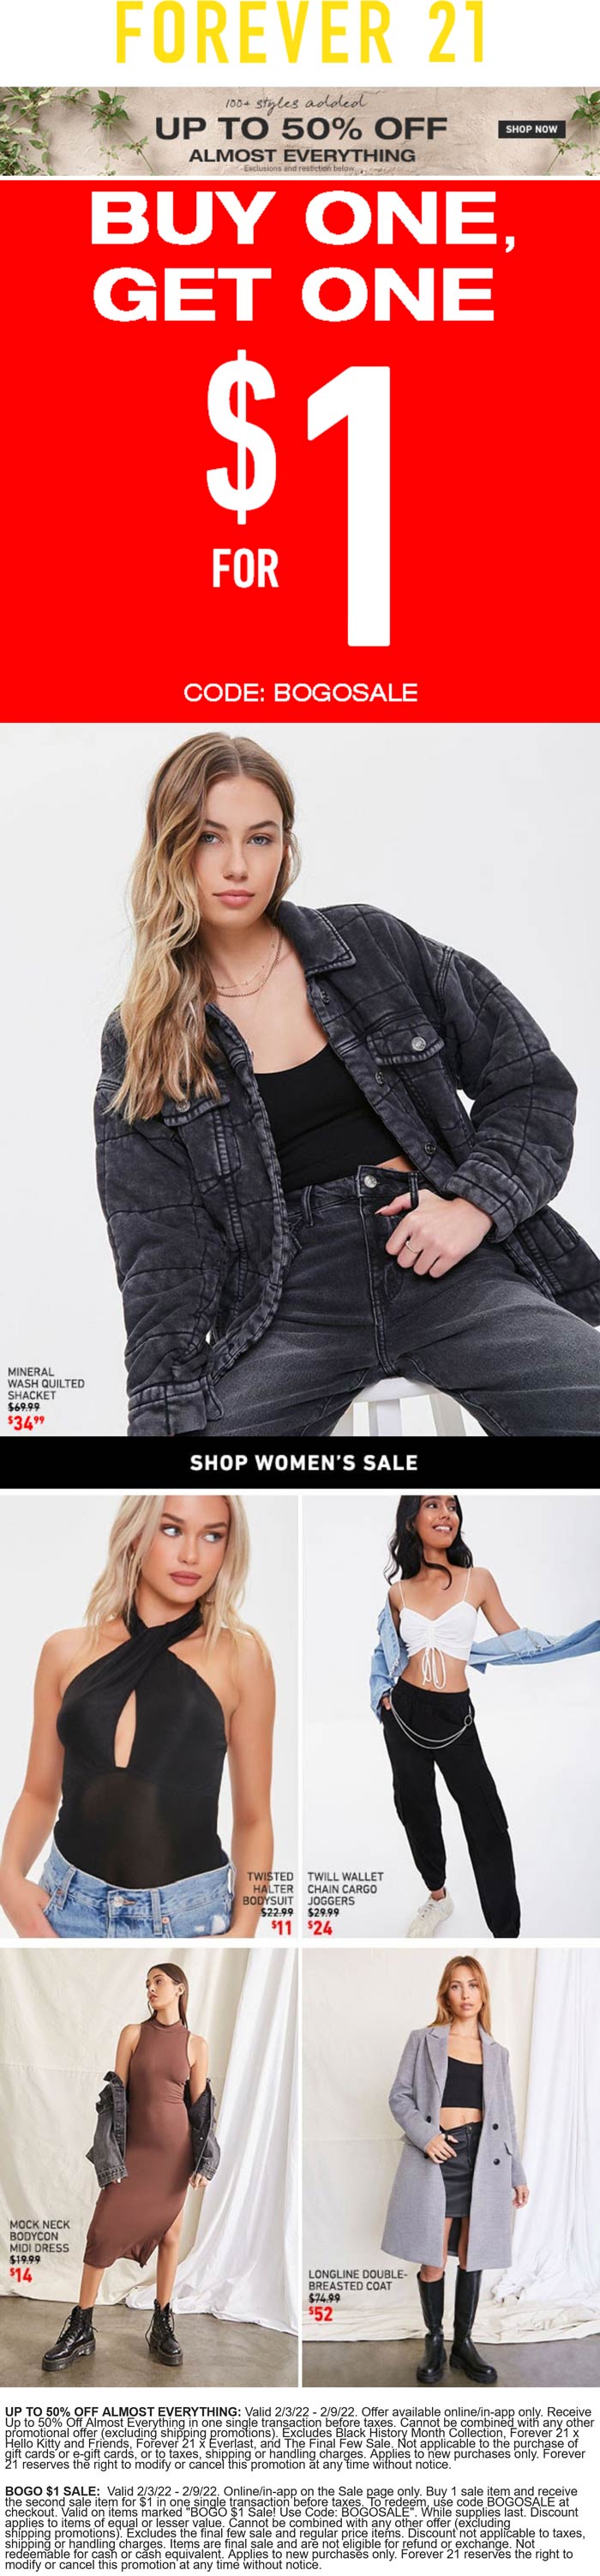 Forever 21 stores Coupon  Second sale item for $1 at Forever 21 via promo code BOGOSALE #forever21 